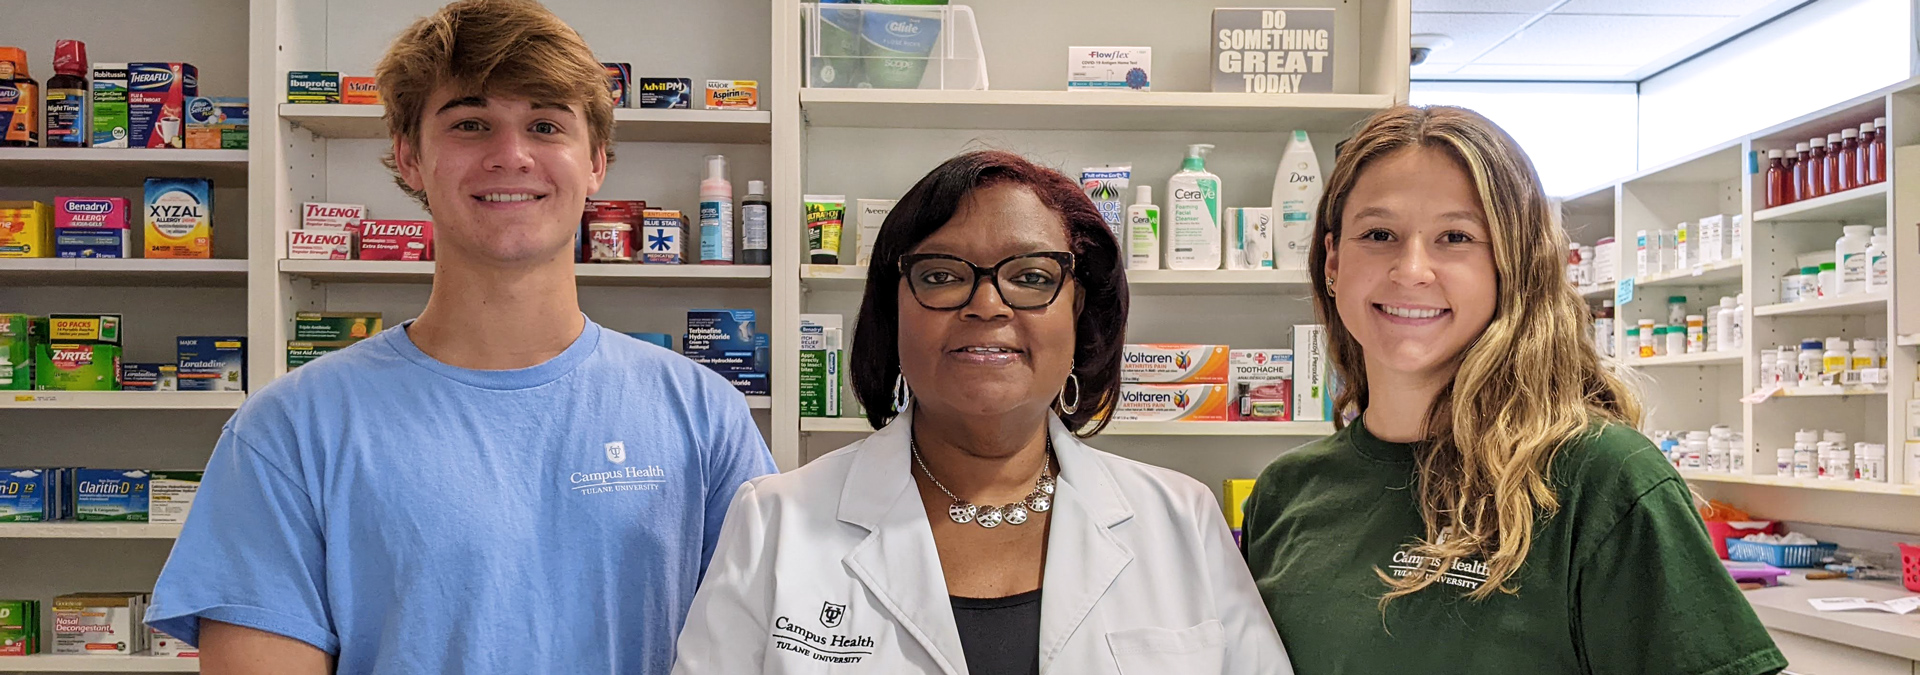 Pharmacist staff smiling from behind the pharmacy counter